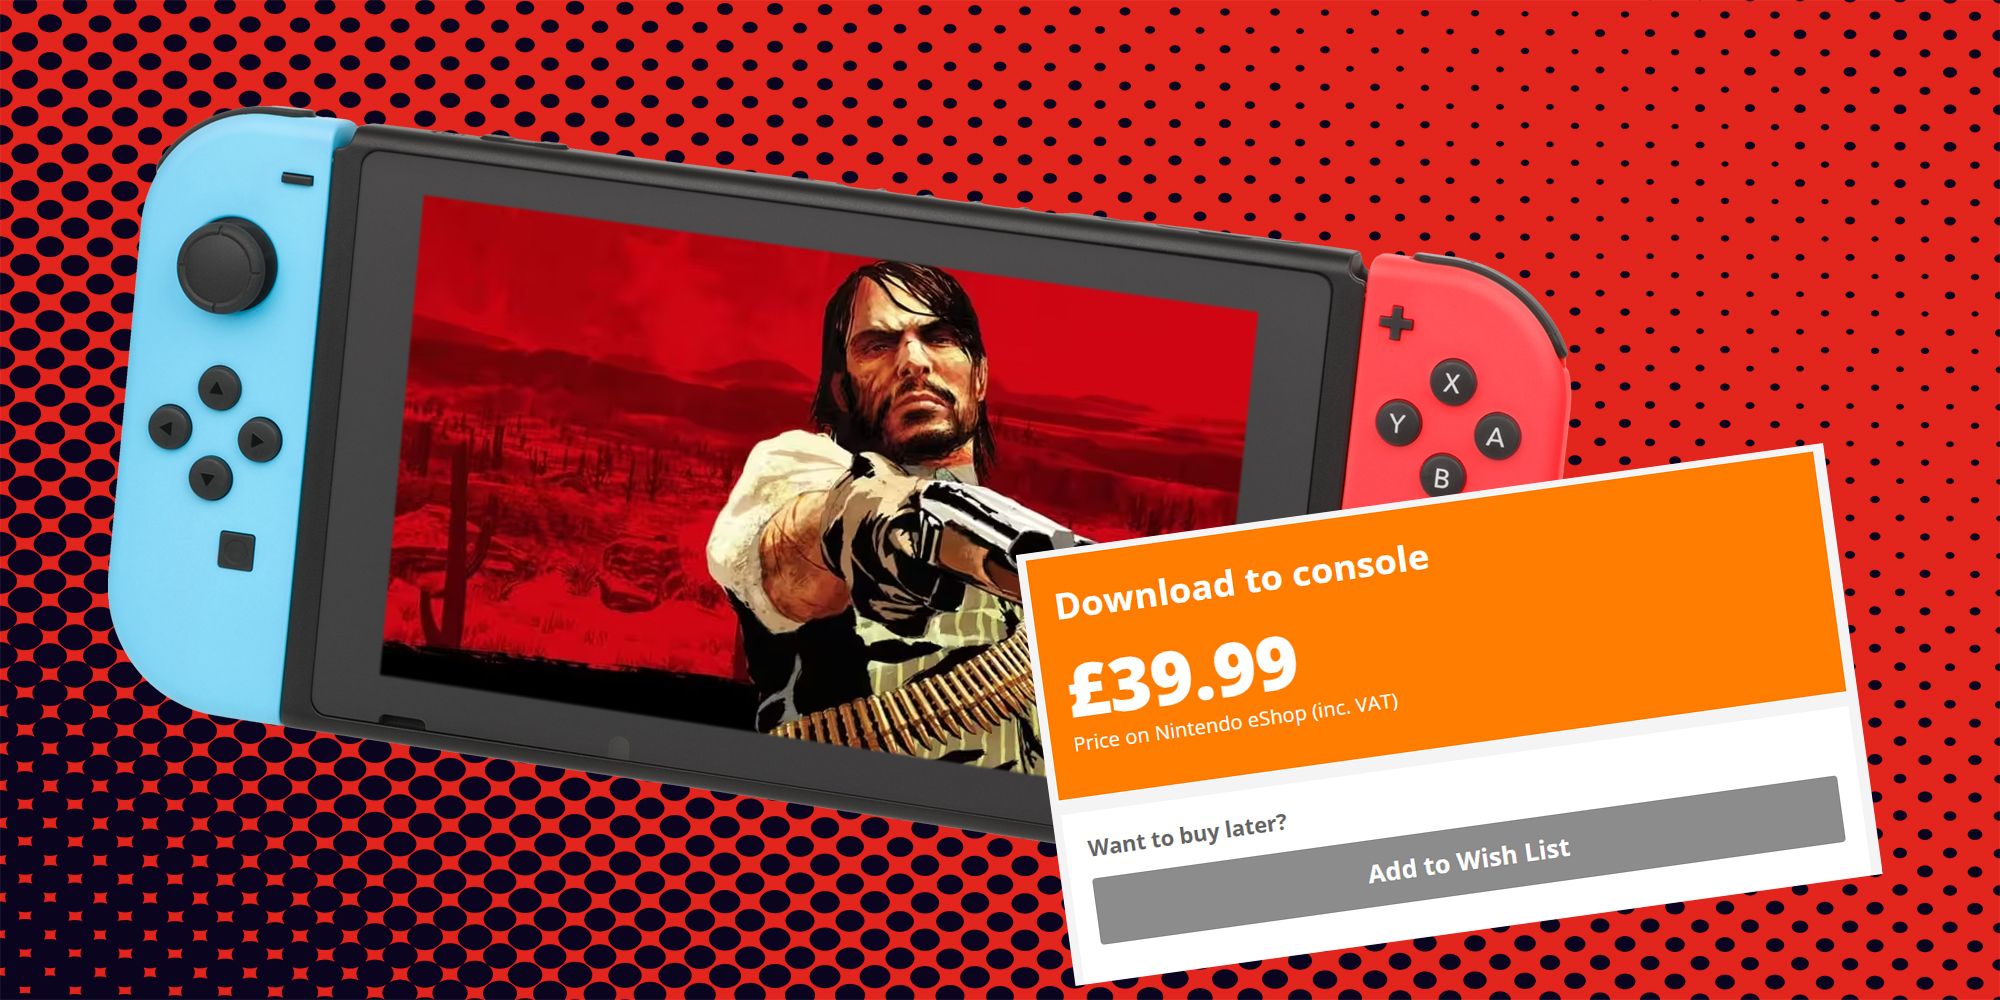 Red Dead Redemption PS4 and Switch physical copies do not include